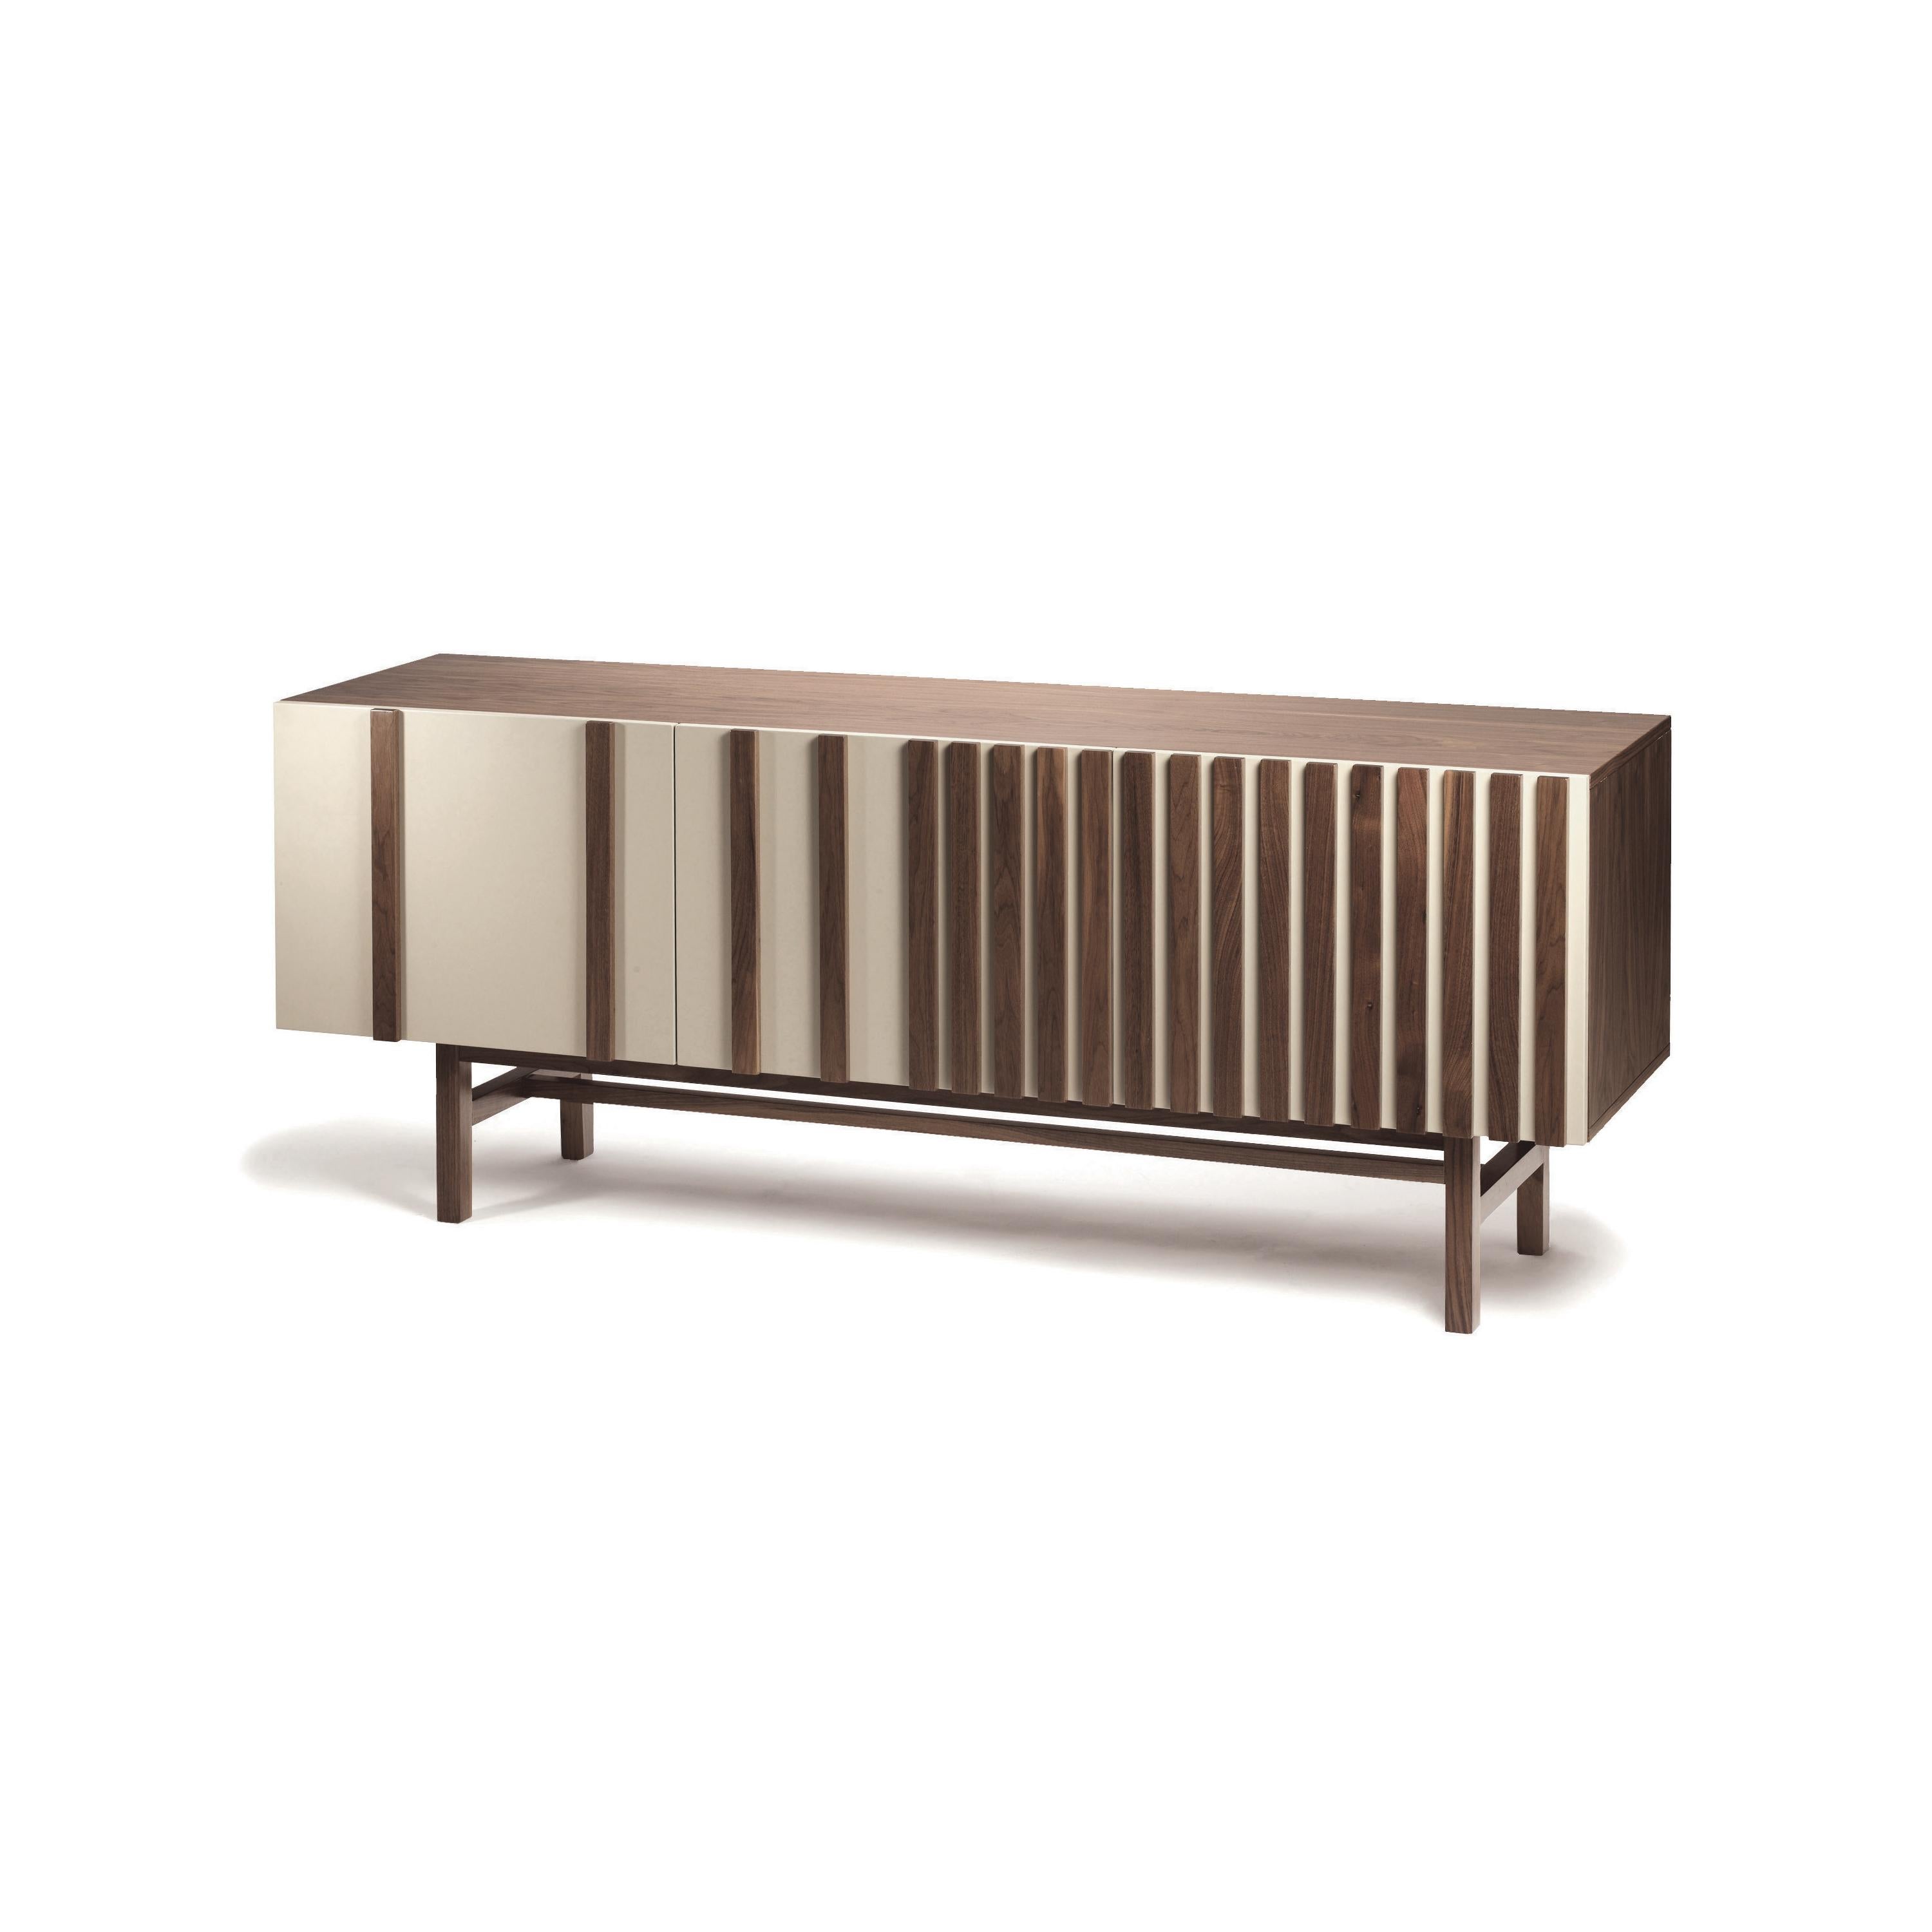 Go sideboard is a high quality product by Mambo Unlimited Ideas, crafted in lacquered mdf structure and doors and plywood veneer applications on doors. It features three dimensional designs on its doors, elegant vertical stripes of plywood